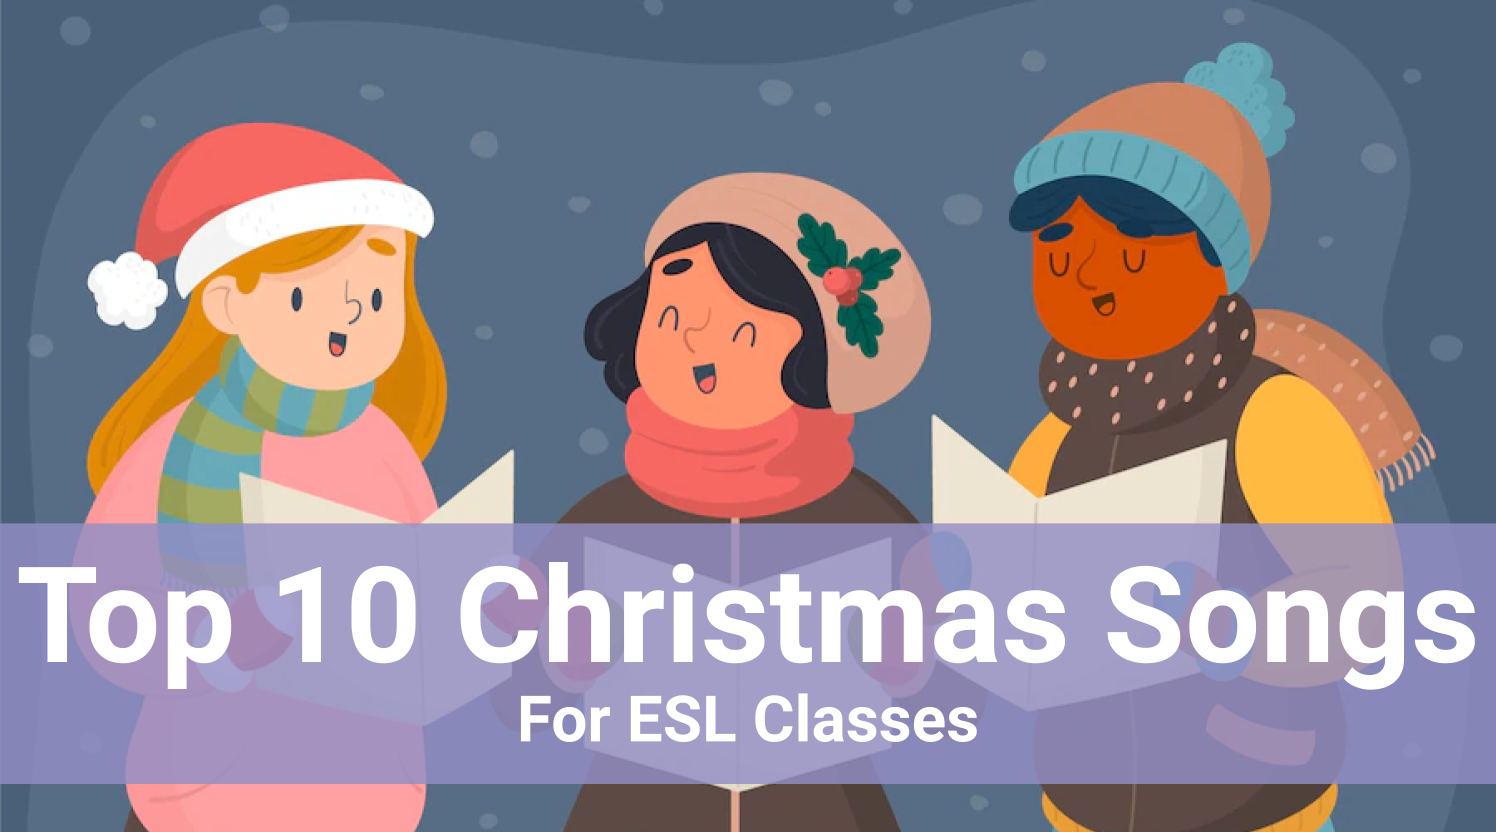 Top 10 Christmas Songs for ESL Classes